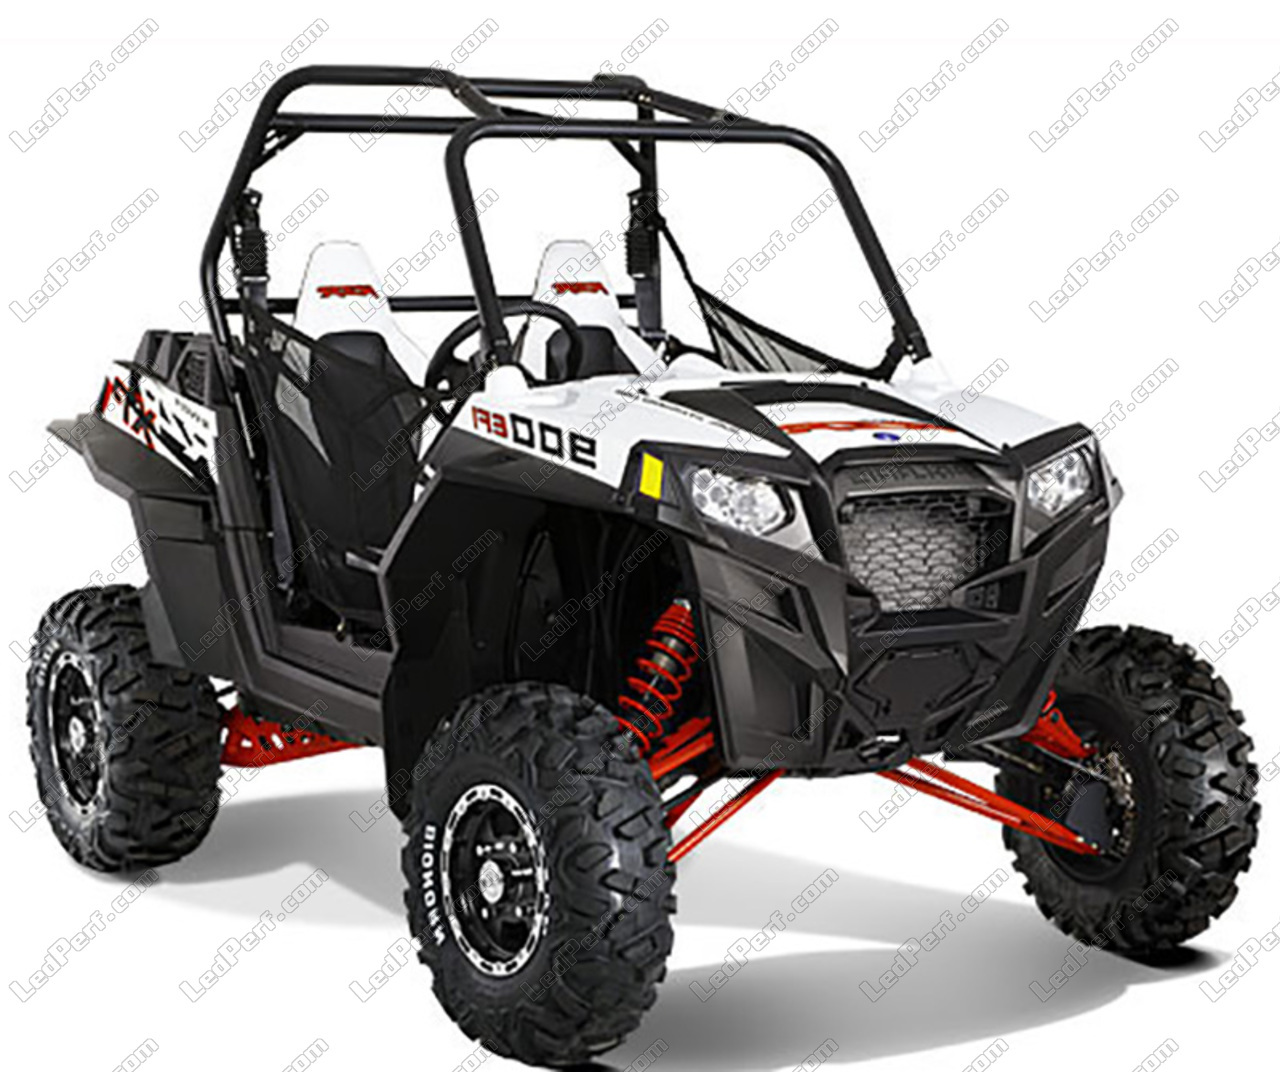 Sequential Dynamic Led Indicators For Polaris Rzr 900